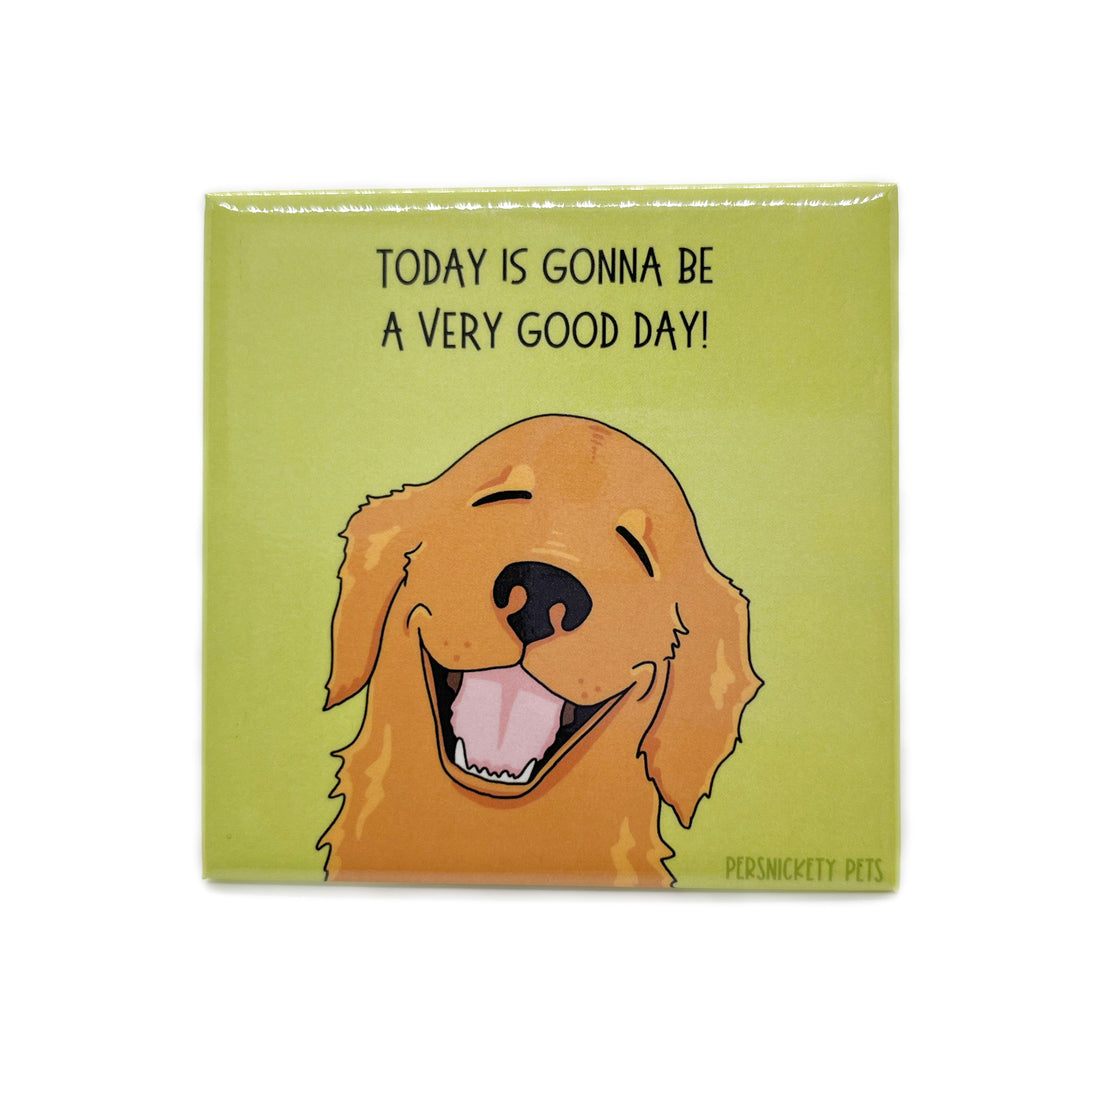 Persnickety Pets: A Very Good Day fridge magnet 